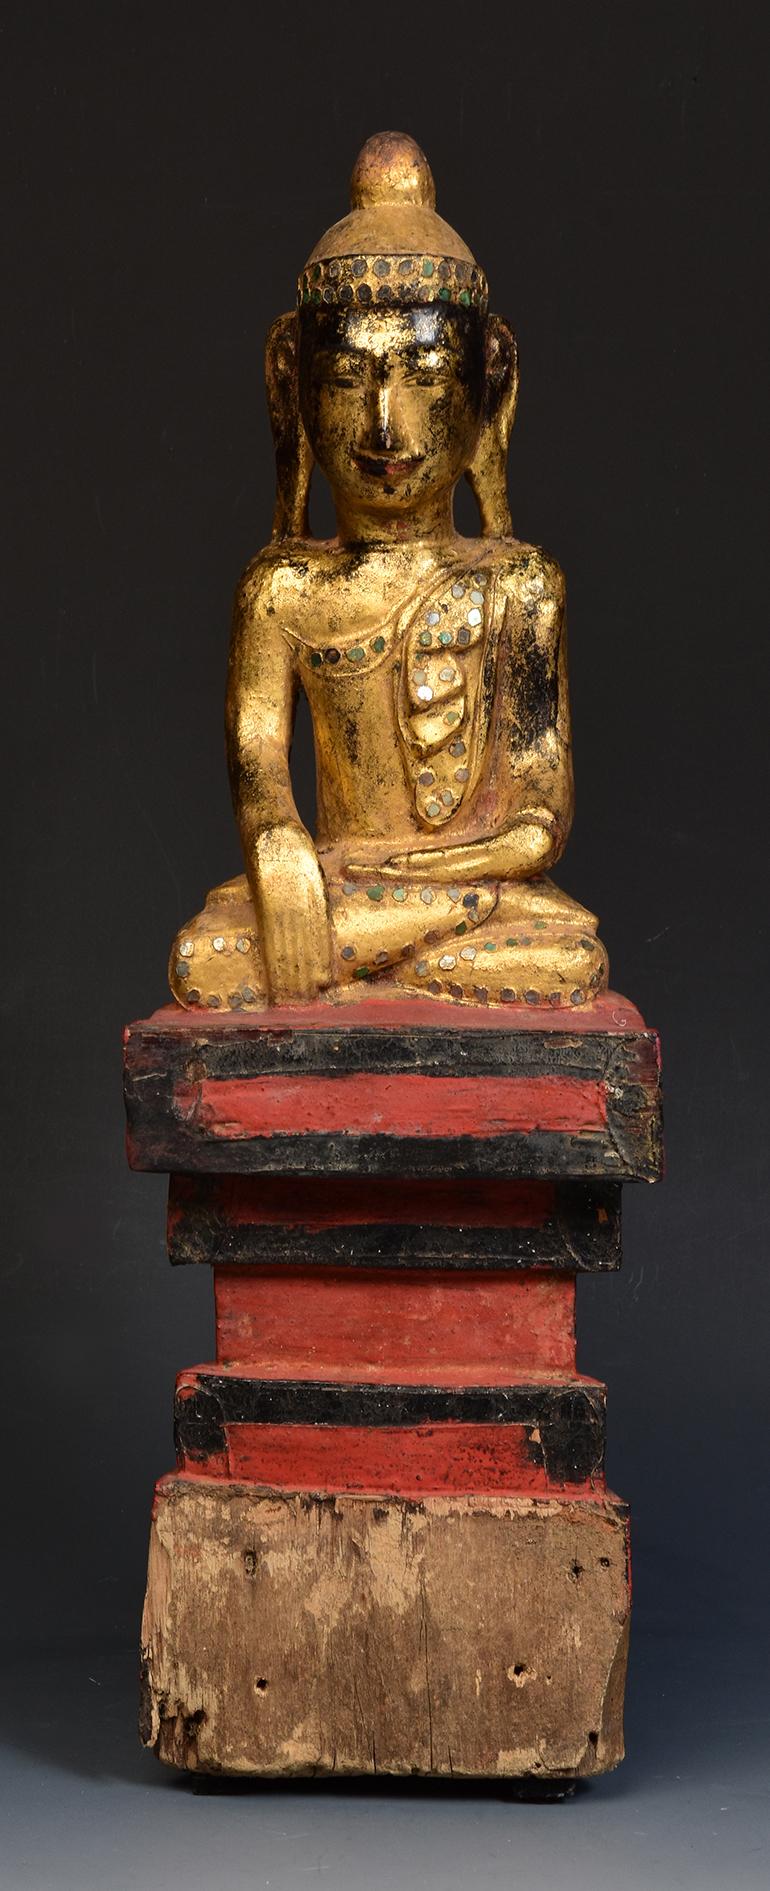 Burmese wooden Buddha sitting in Mara Vijaya (calling the earth to witness) posture on a base, with gilded gold and glass.

Age: Burma, Early Mandalay Period, Early 19th century.
Size: Height 41.3 cm. / width 13.3 cm.
Condition: Nice condition